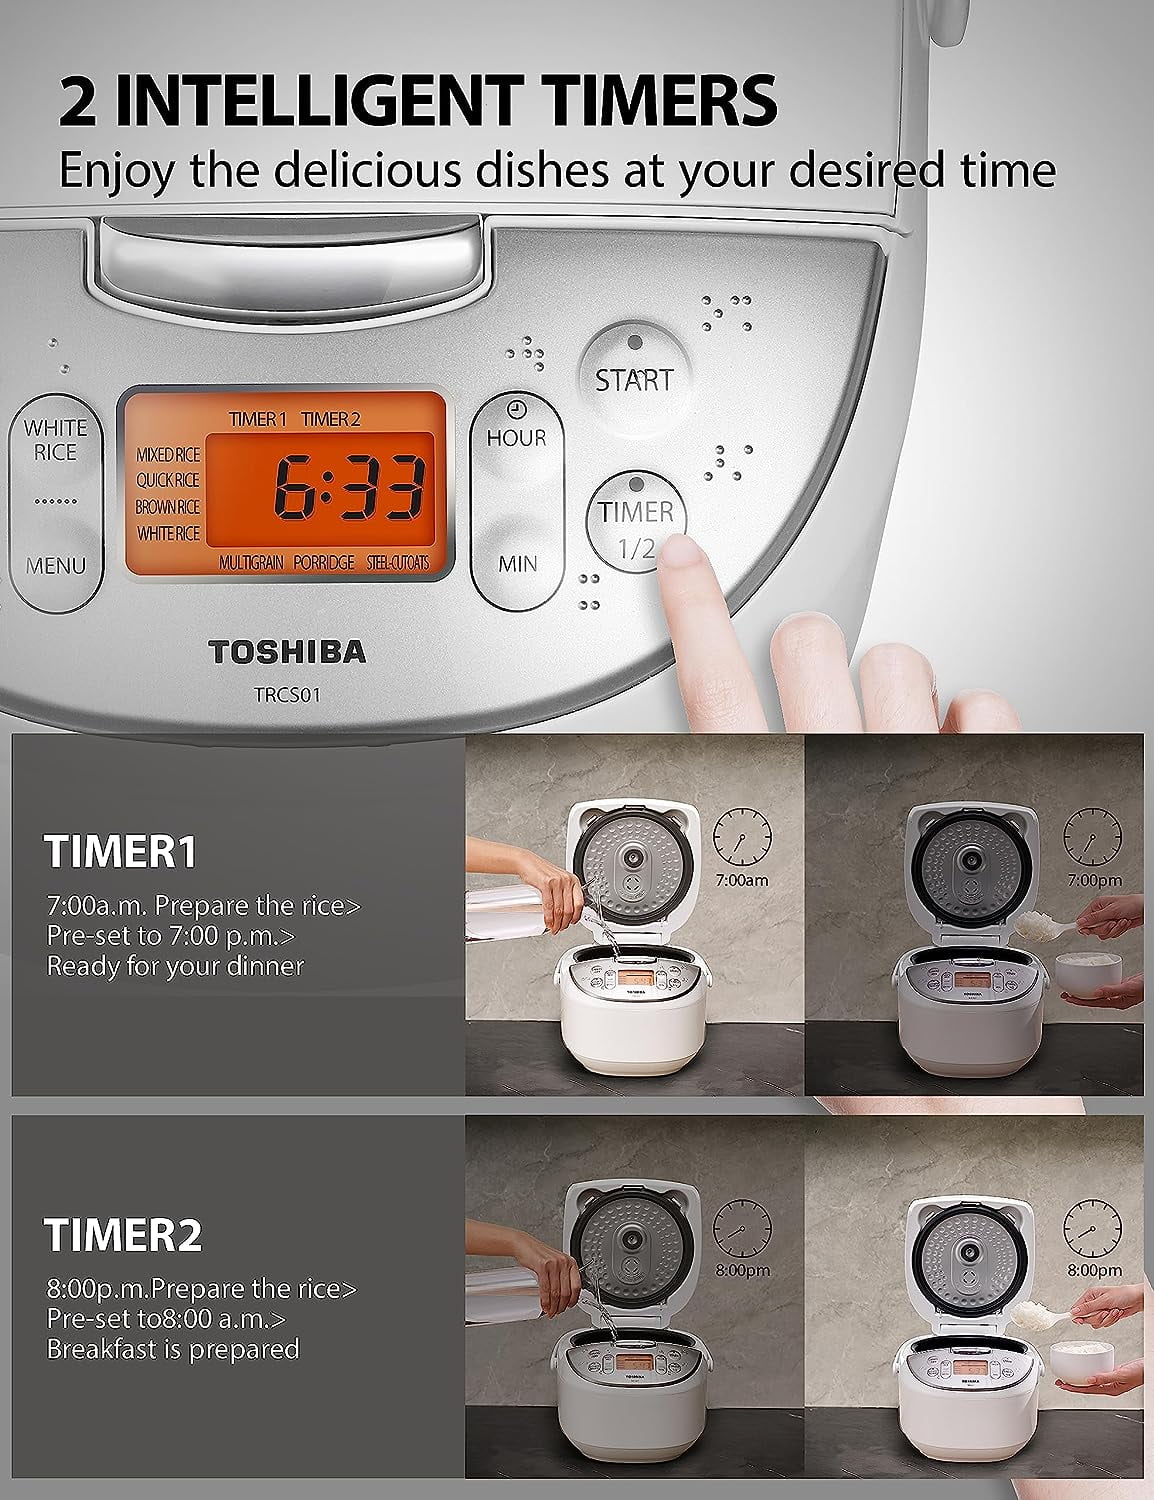 Toshiba TRCS01 Cooker 6 Cups Uncooked (3L) with Fuzzy Logic and One-Touch  Cooking, Brown Rice, White Rice and Porridge 